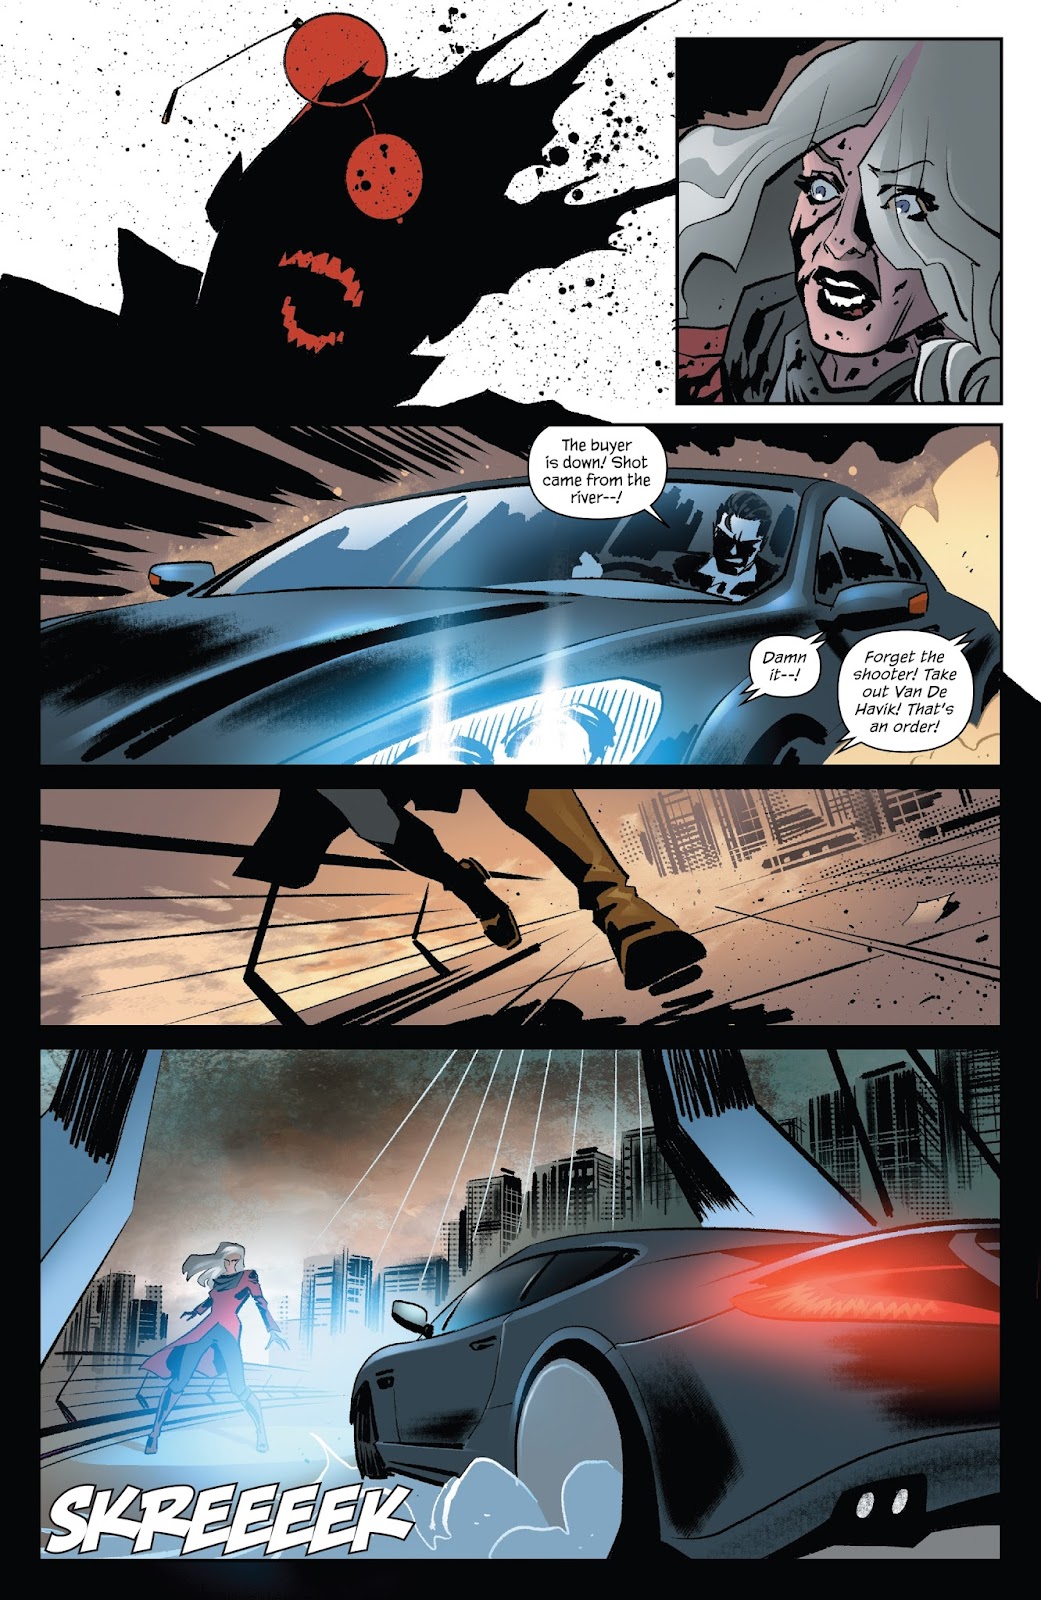 James Bond: Kill Chain issue 1 - Page 13